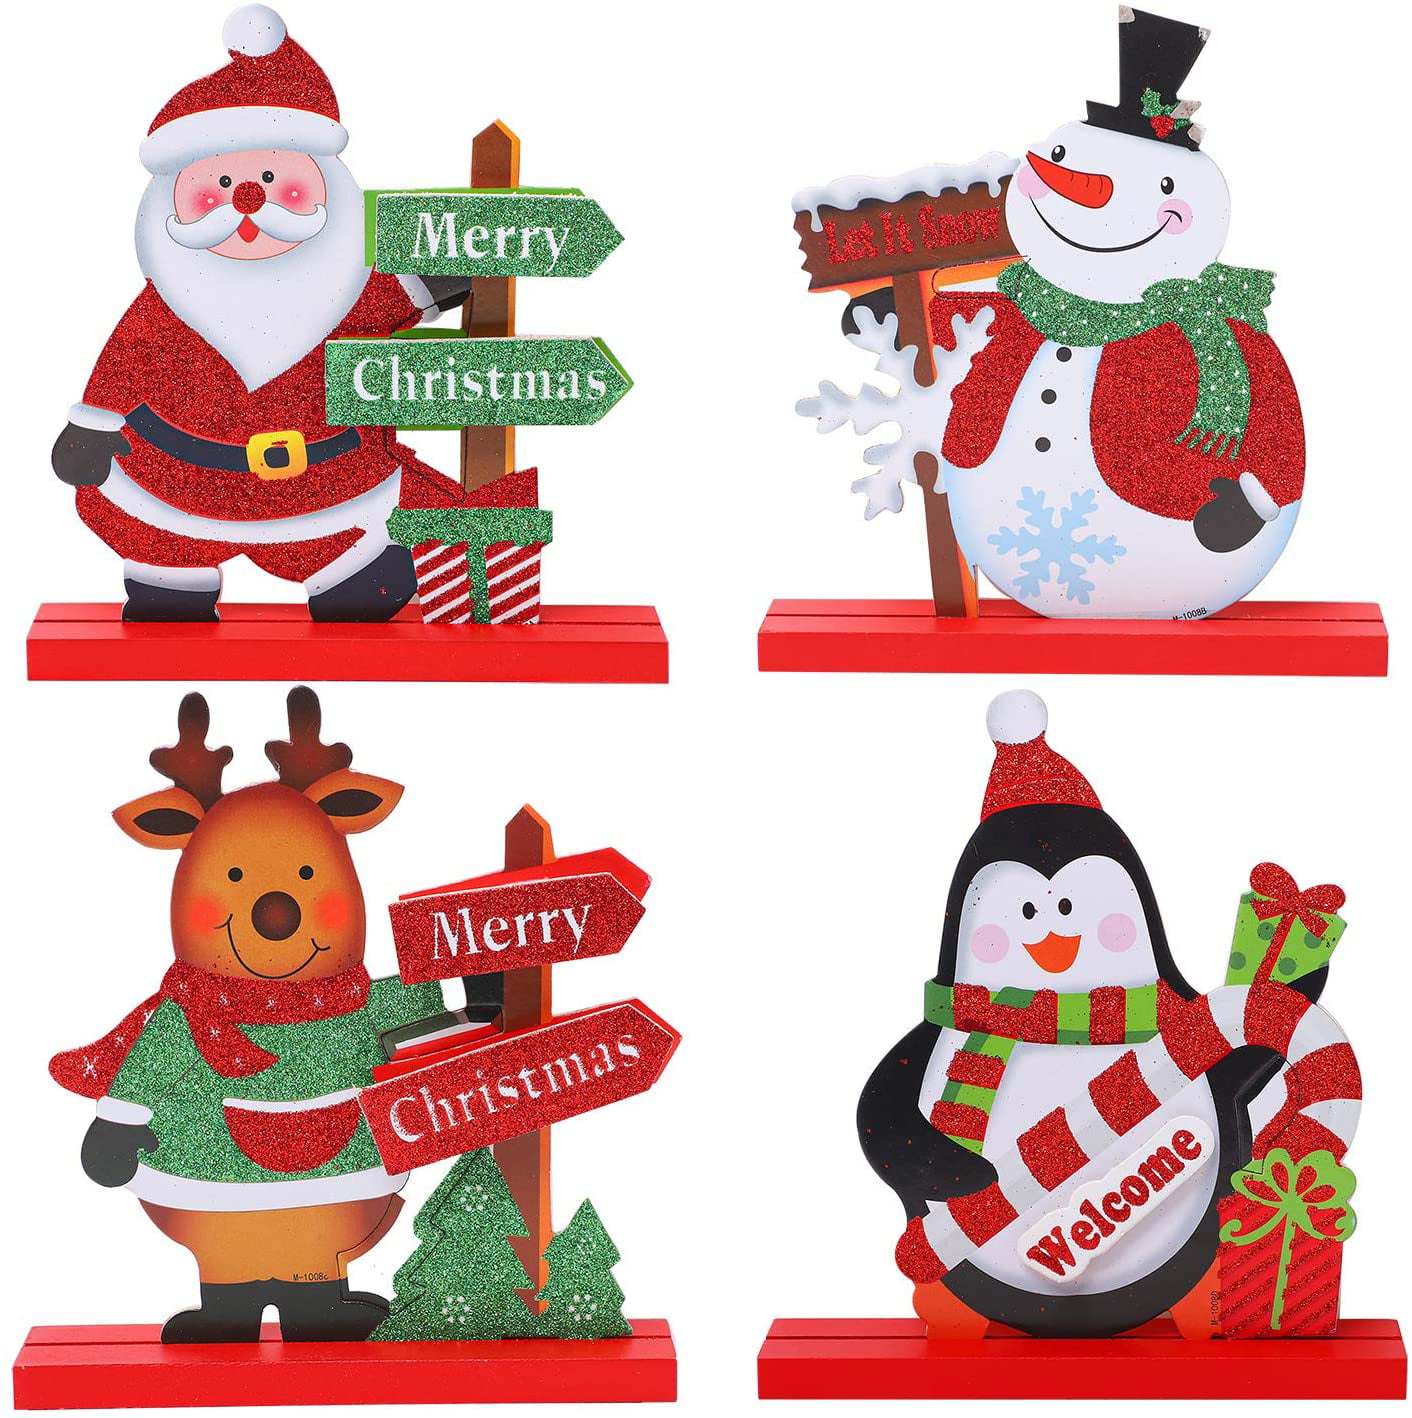 Gift Boutique 3 Christmas Table Decorations for Dinner Party Coffee Table Snowman Santa Reindeer Merry Christmas Happy Holidays Centerpiece